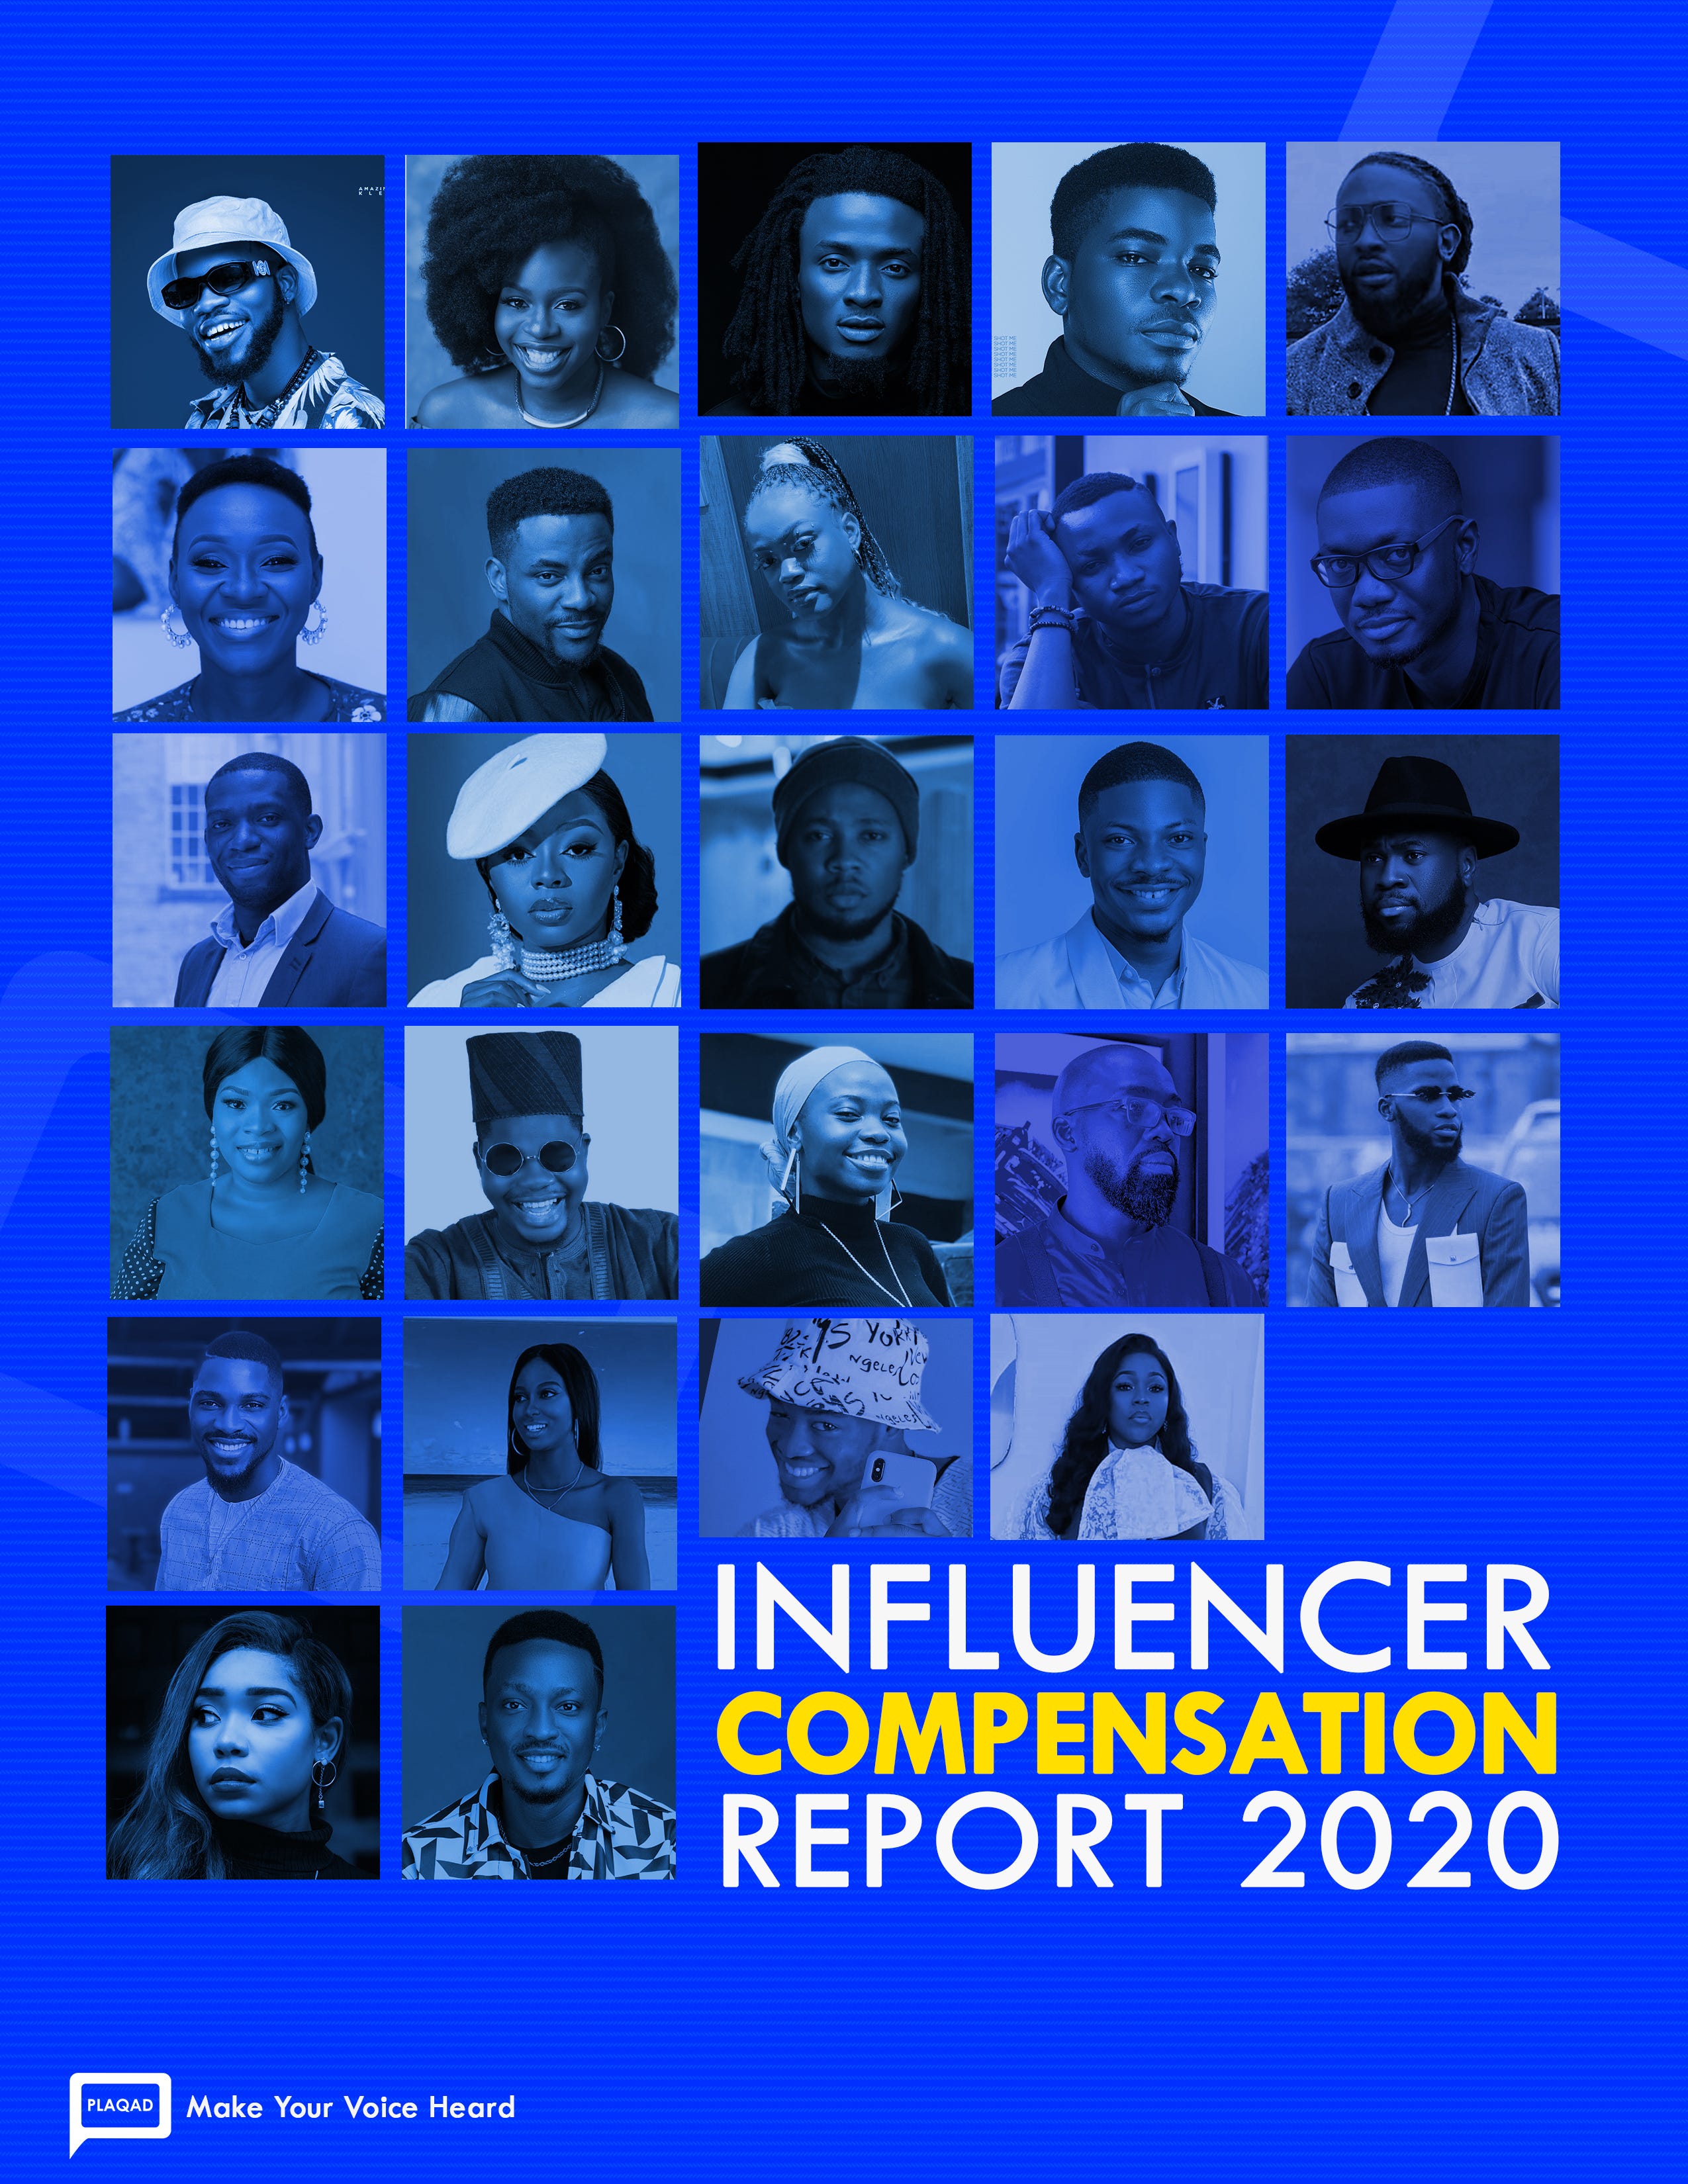 We just launched the Influencer Compensation Report 2020